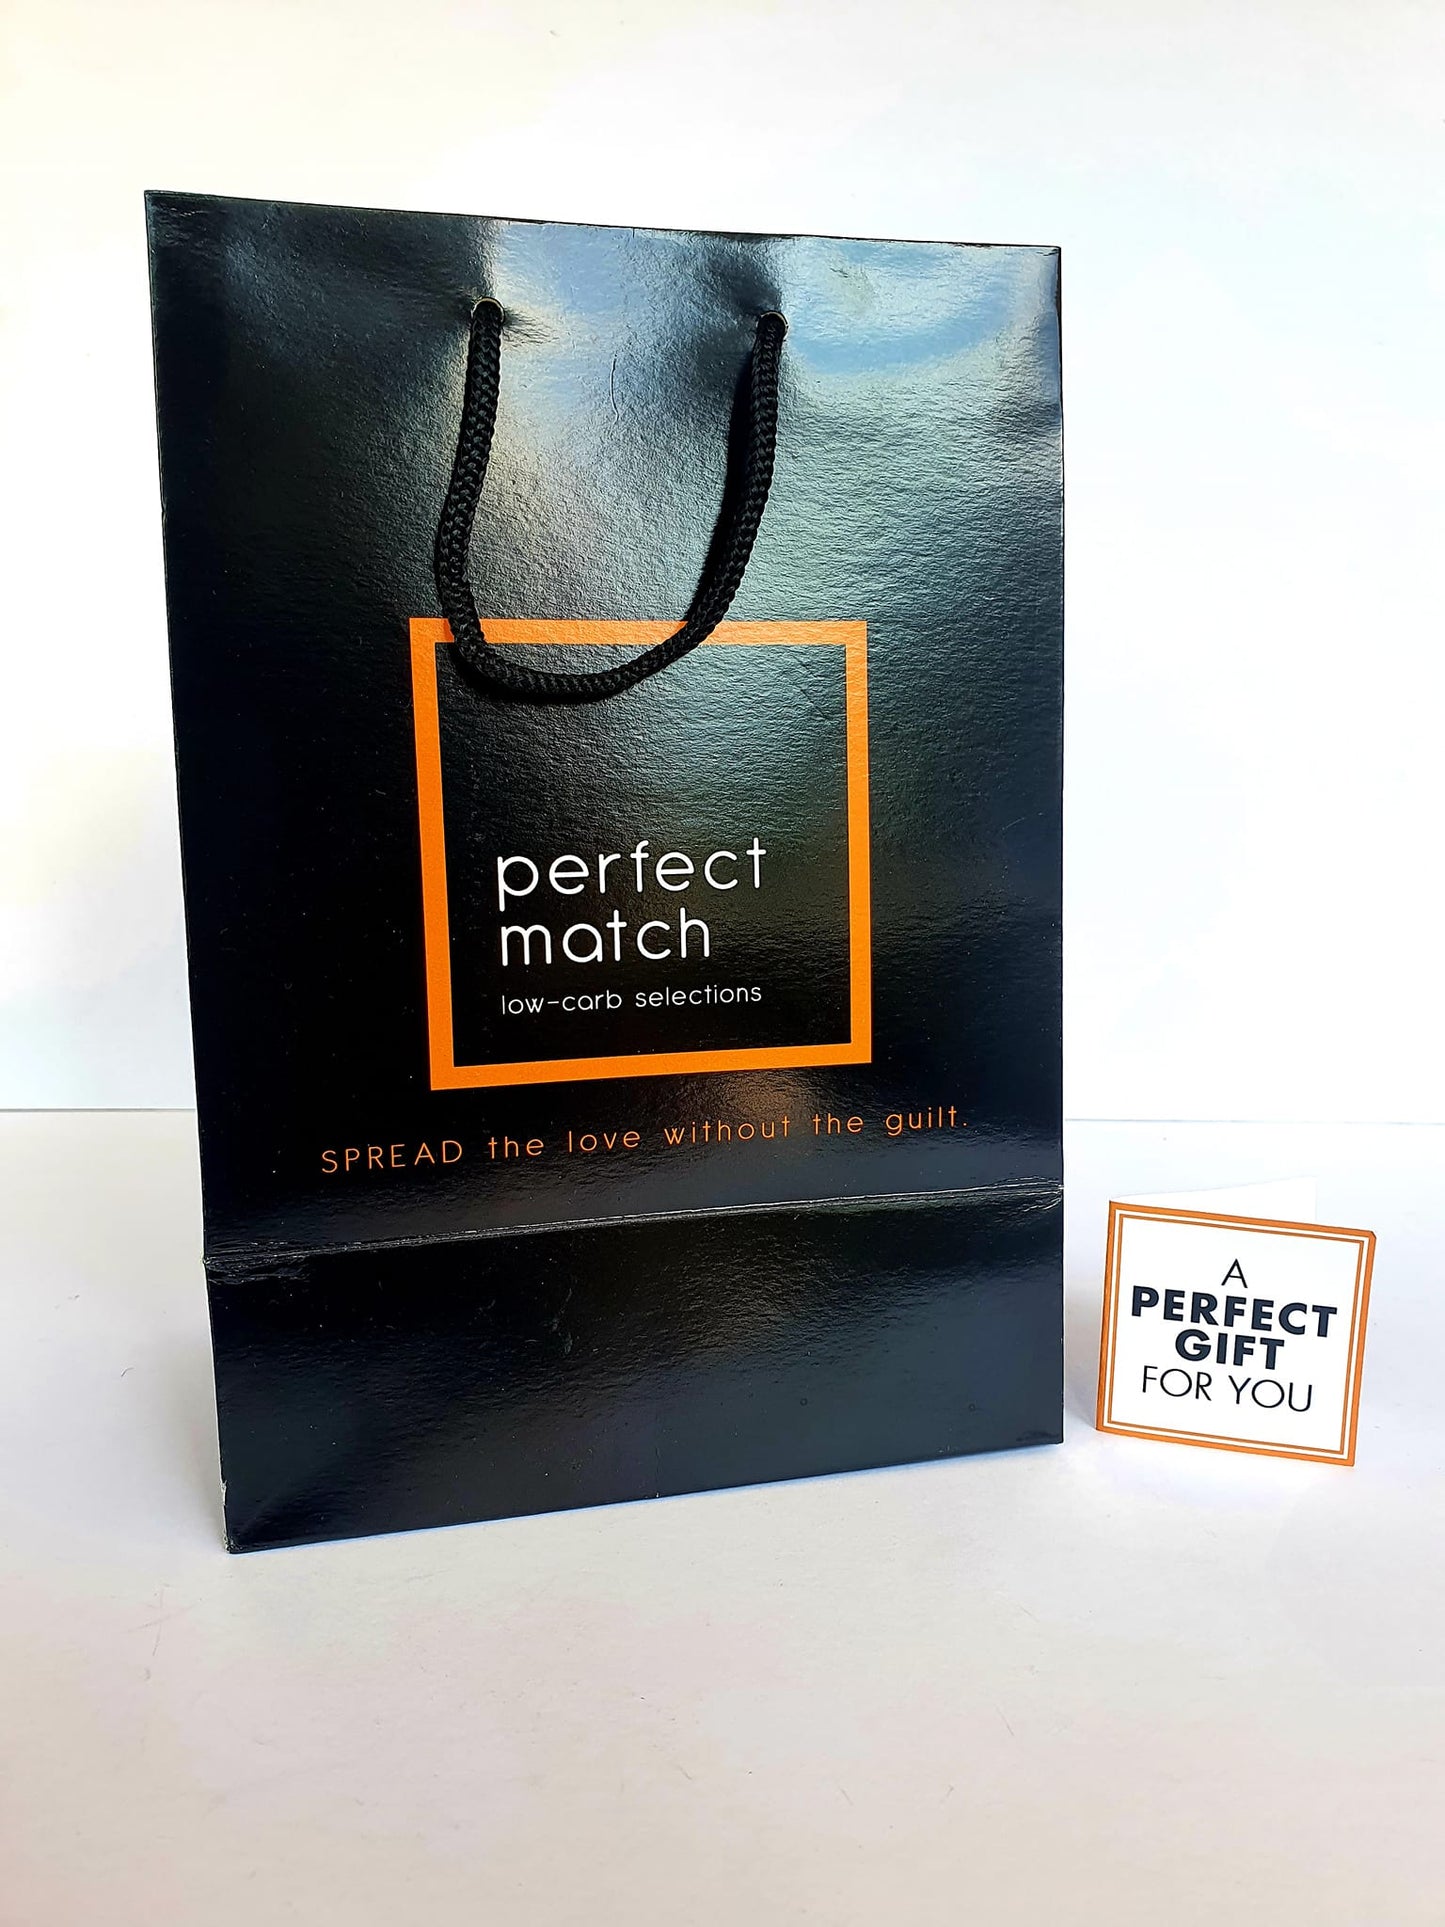 PerfectMatch Low-carb l Classic Keto Gift Bag and Gift Card